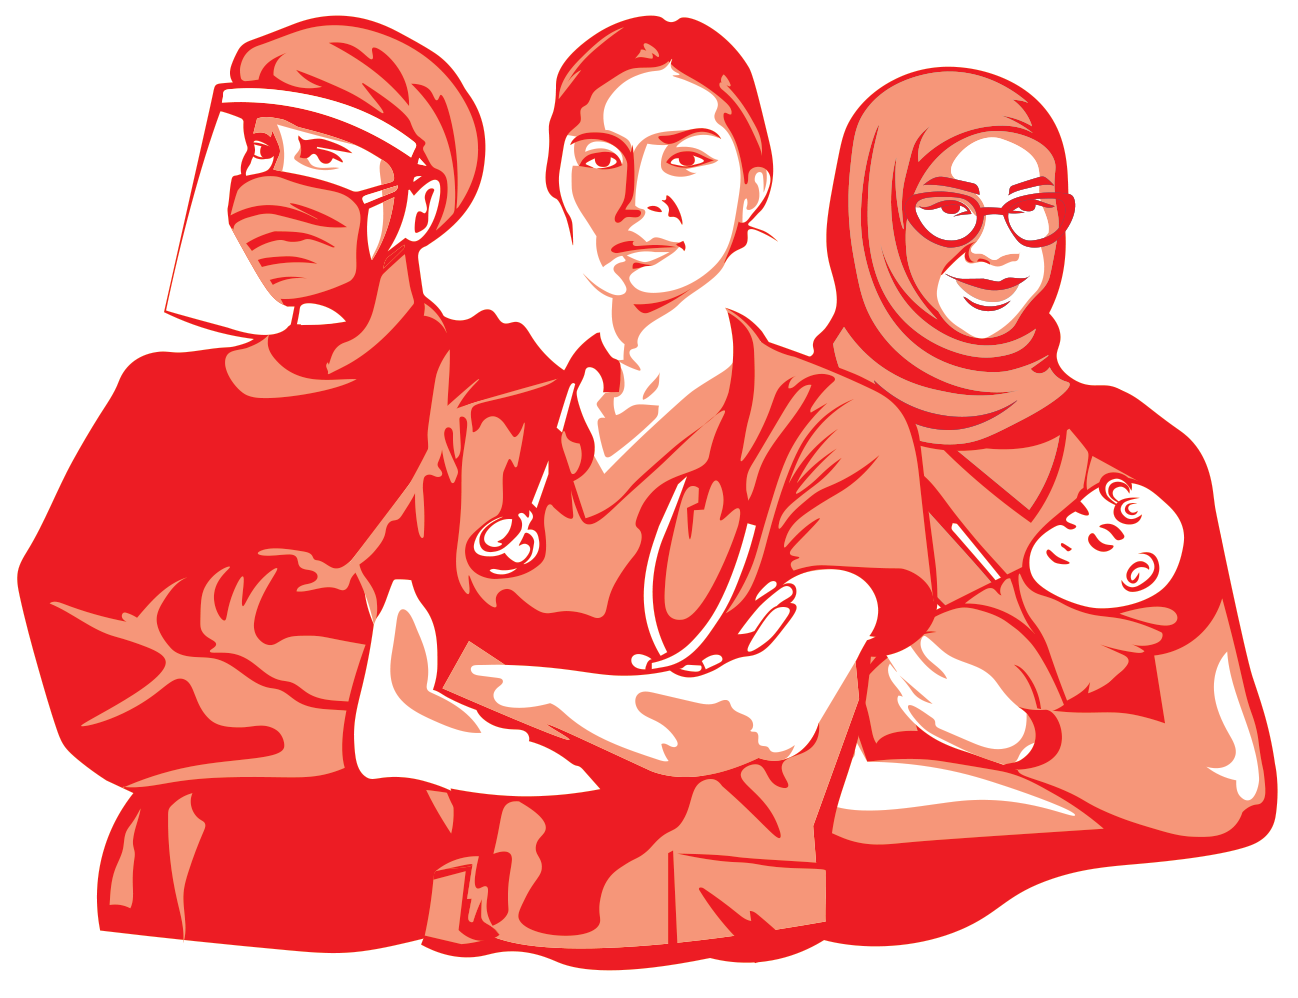 Value us - logo of two nurses and a midwife